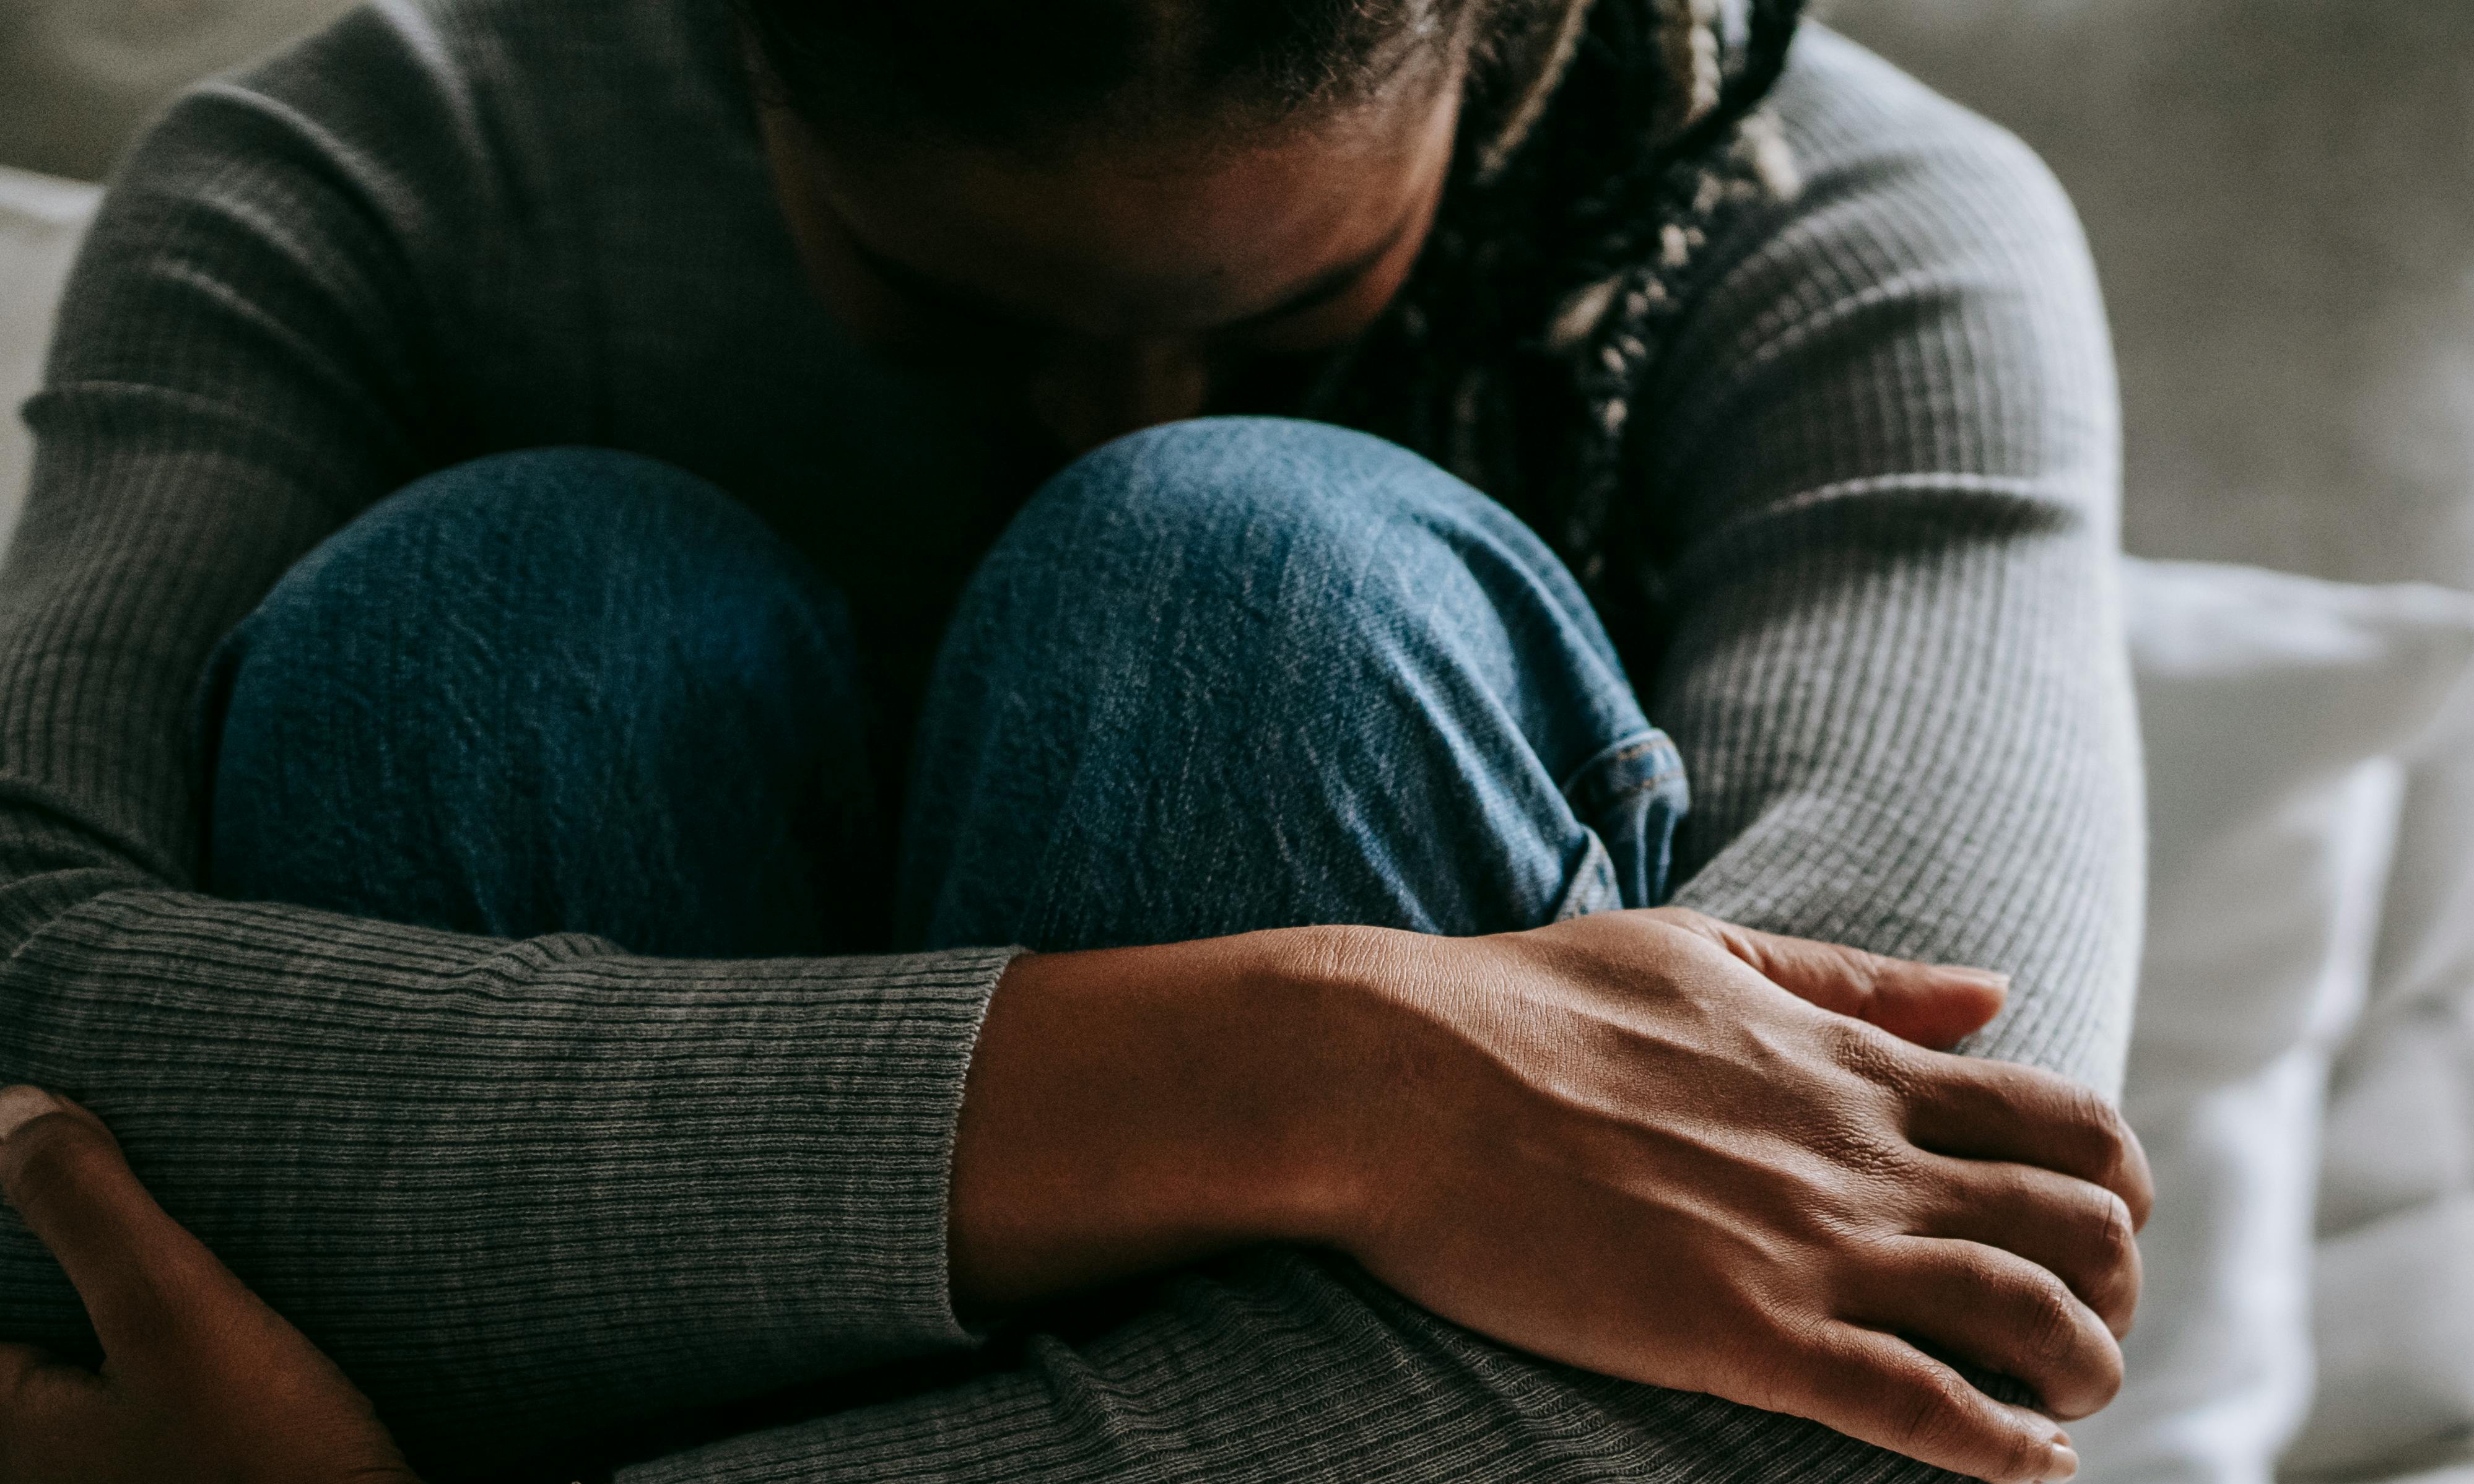 A young girl hugs her knees in sadness | Source: Pexels